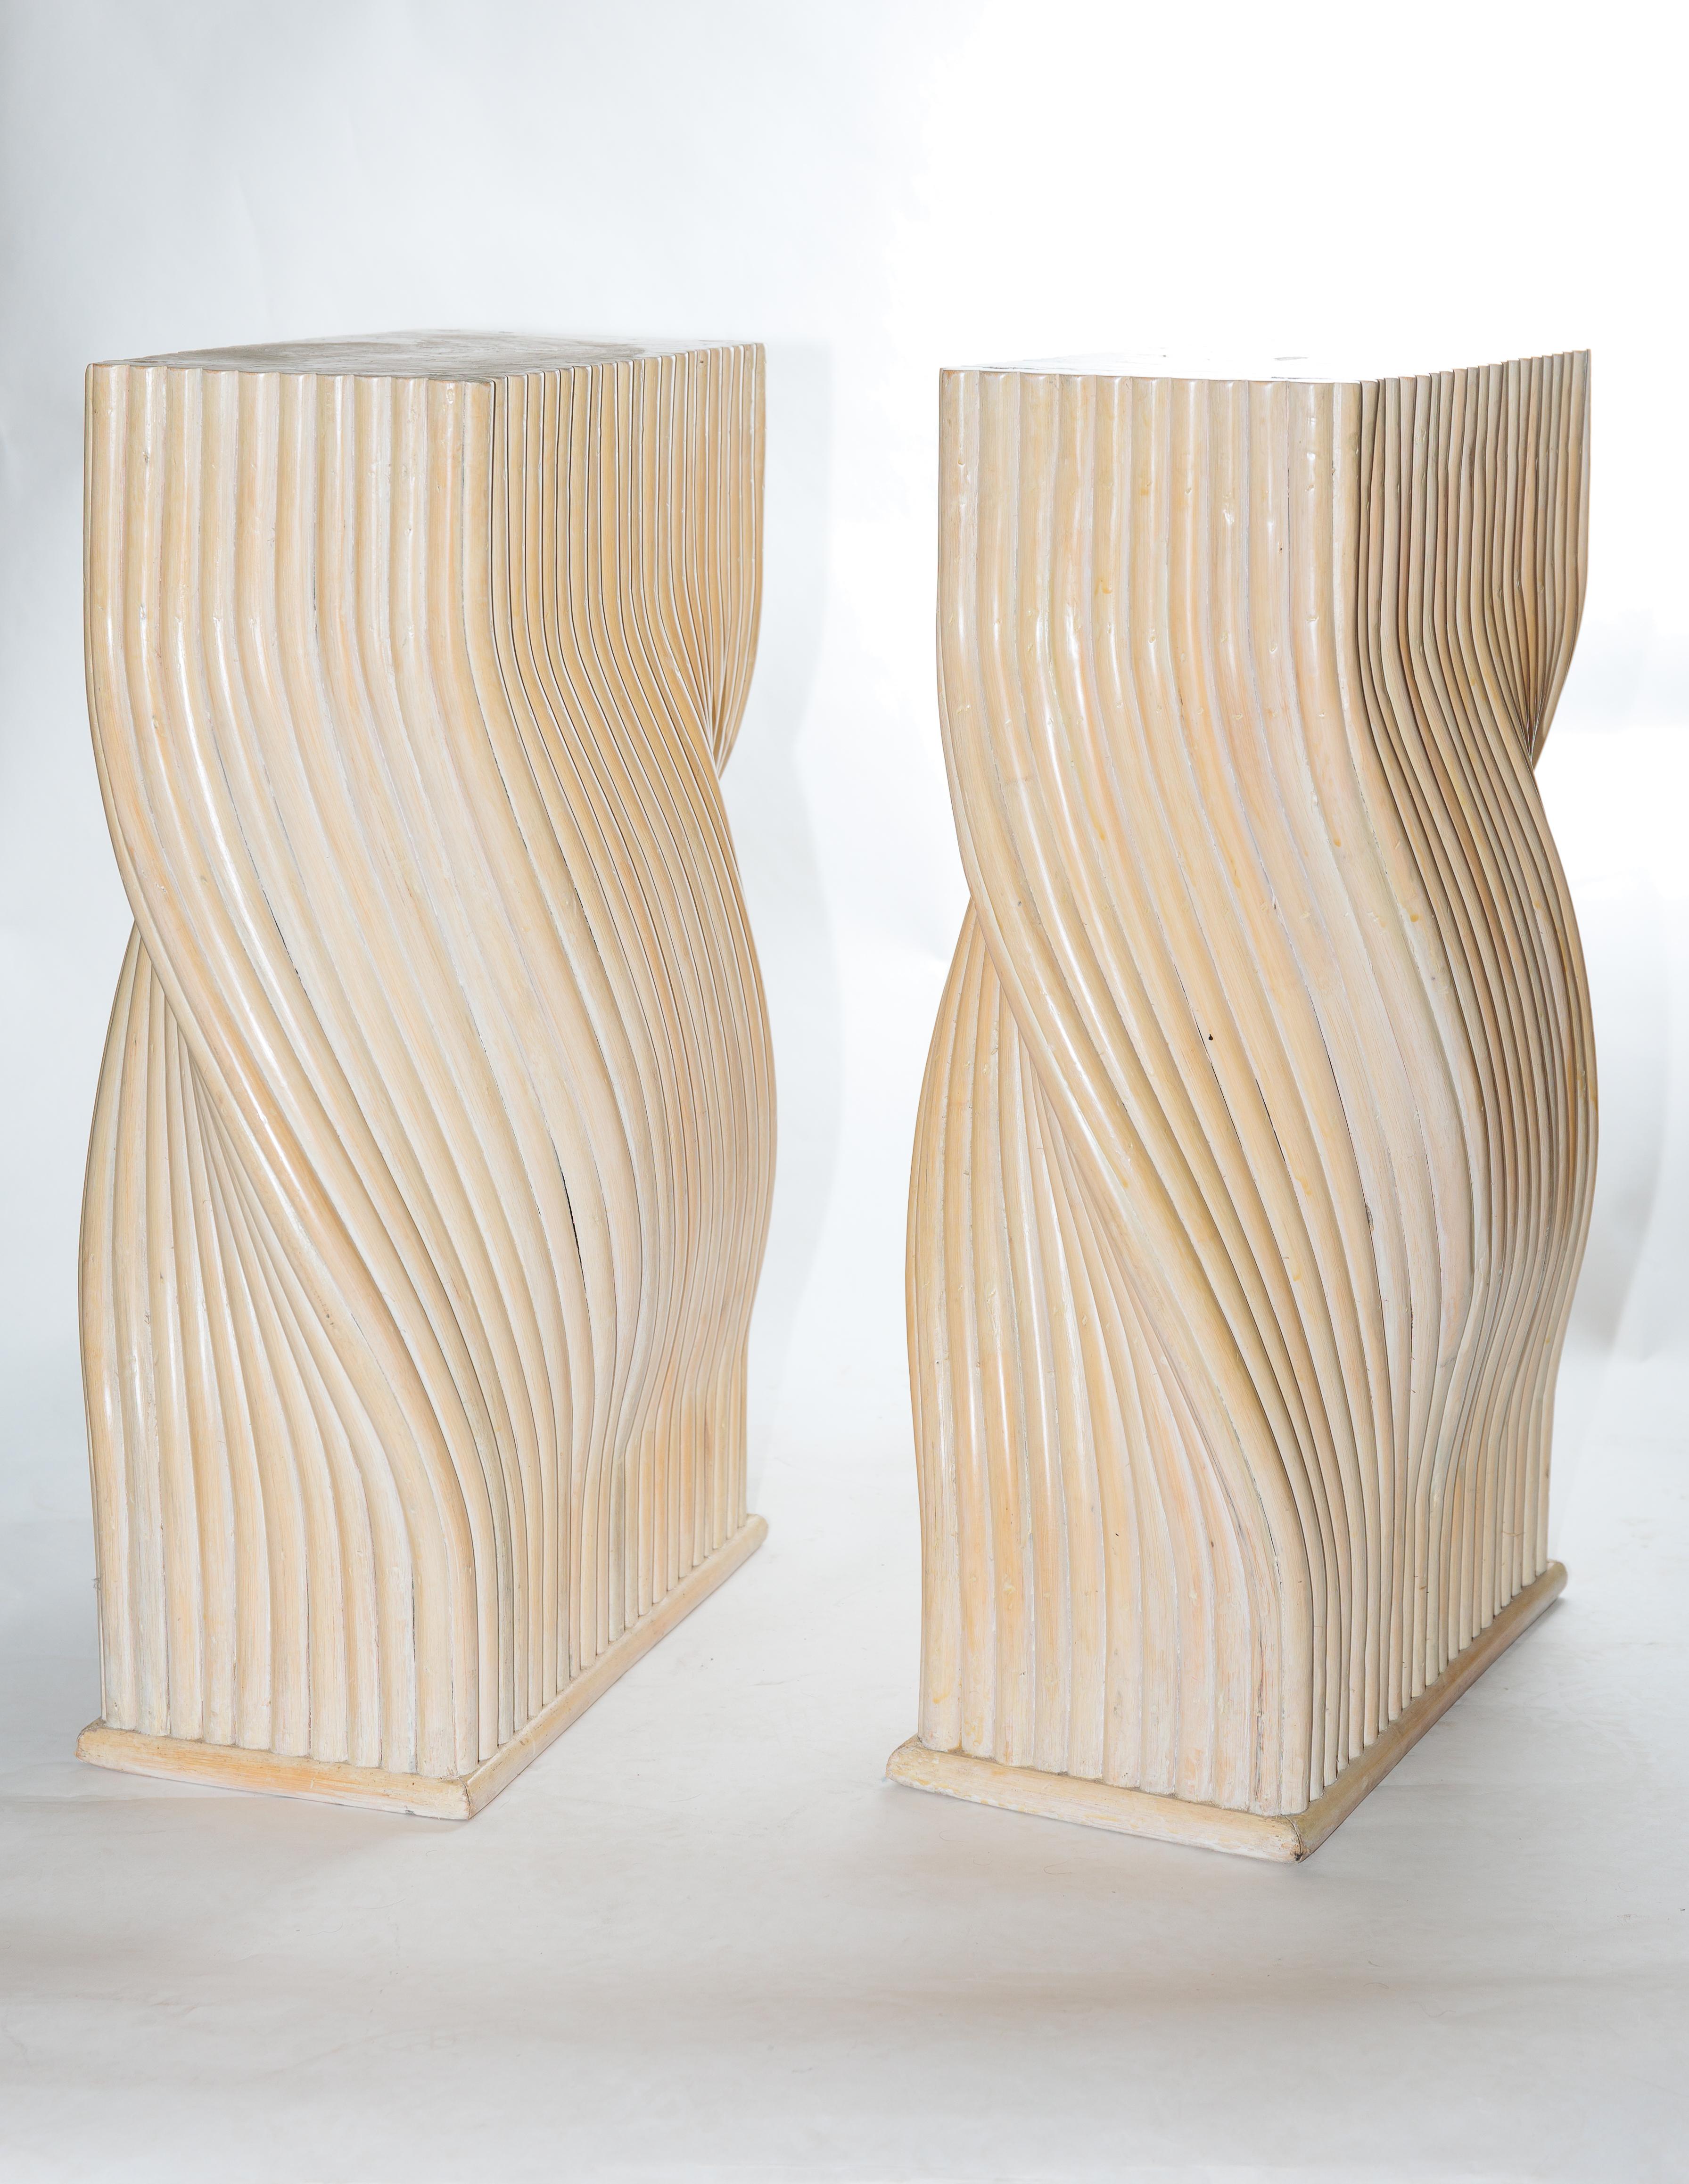 Bamboo Pedestal Bases, by McGuire 1